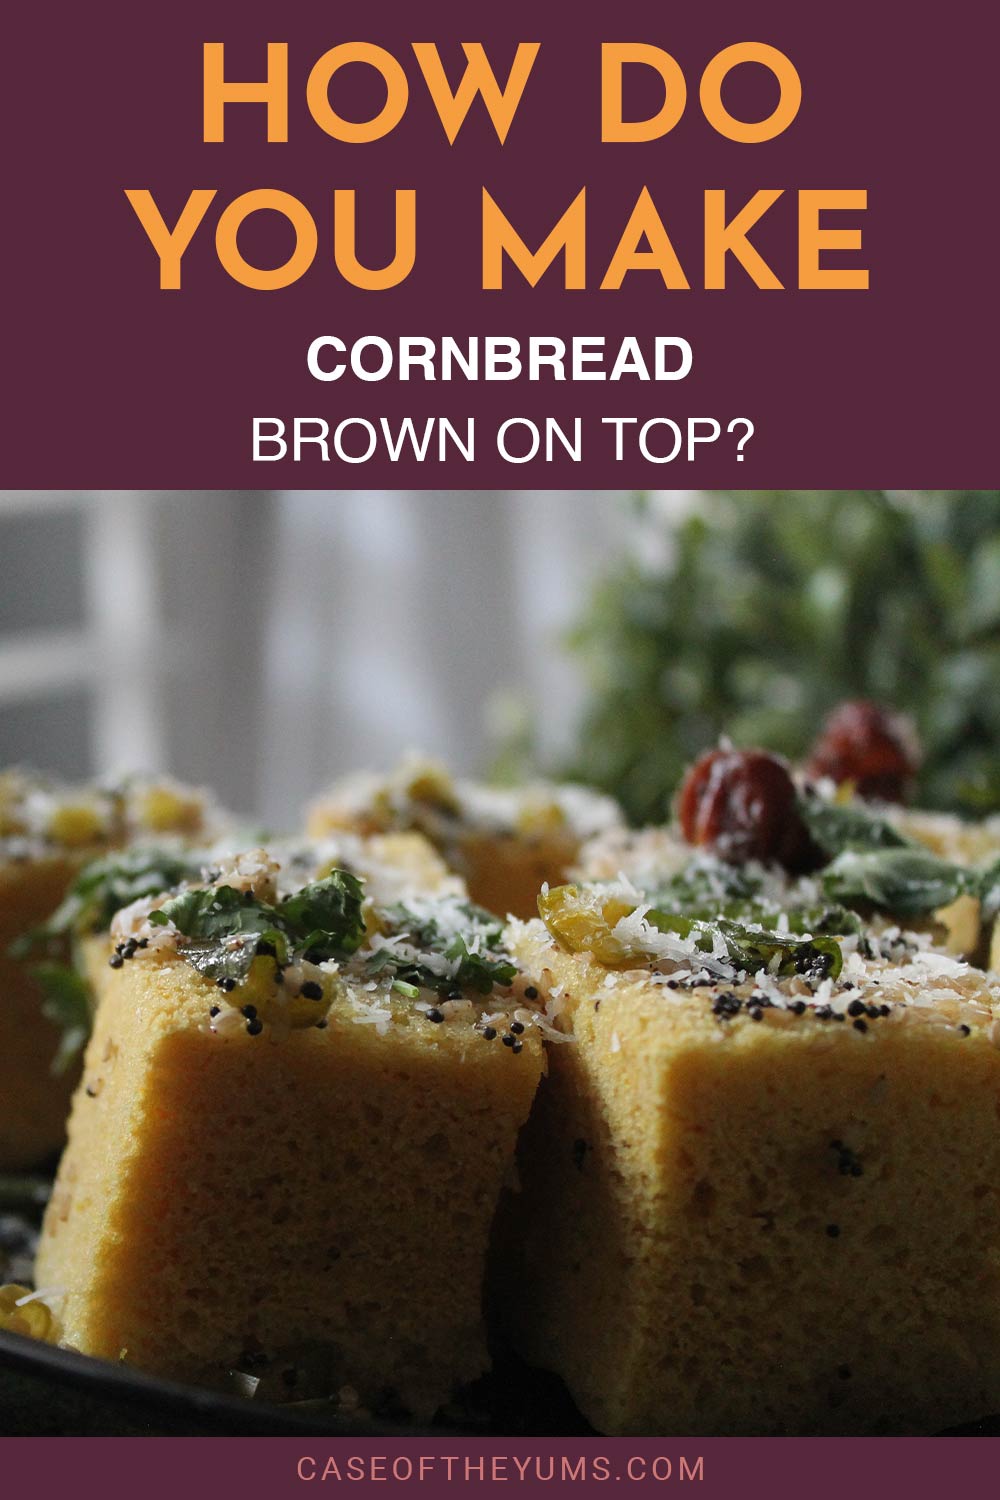 Cornbread pieces - How Do You Make them Brown On Top?